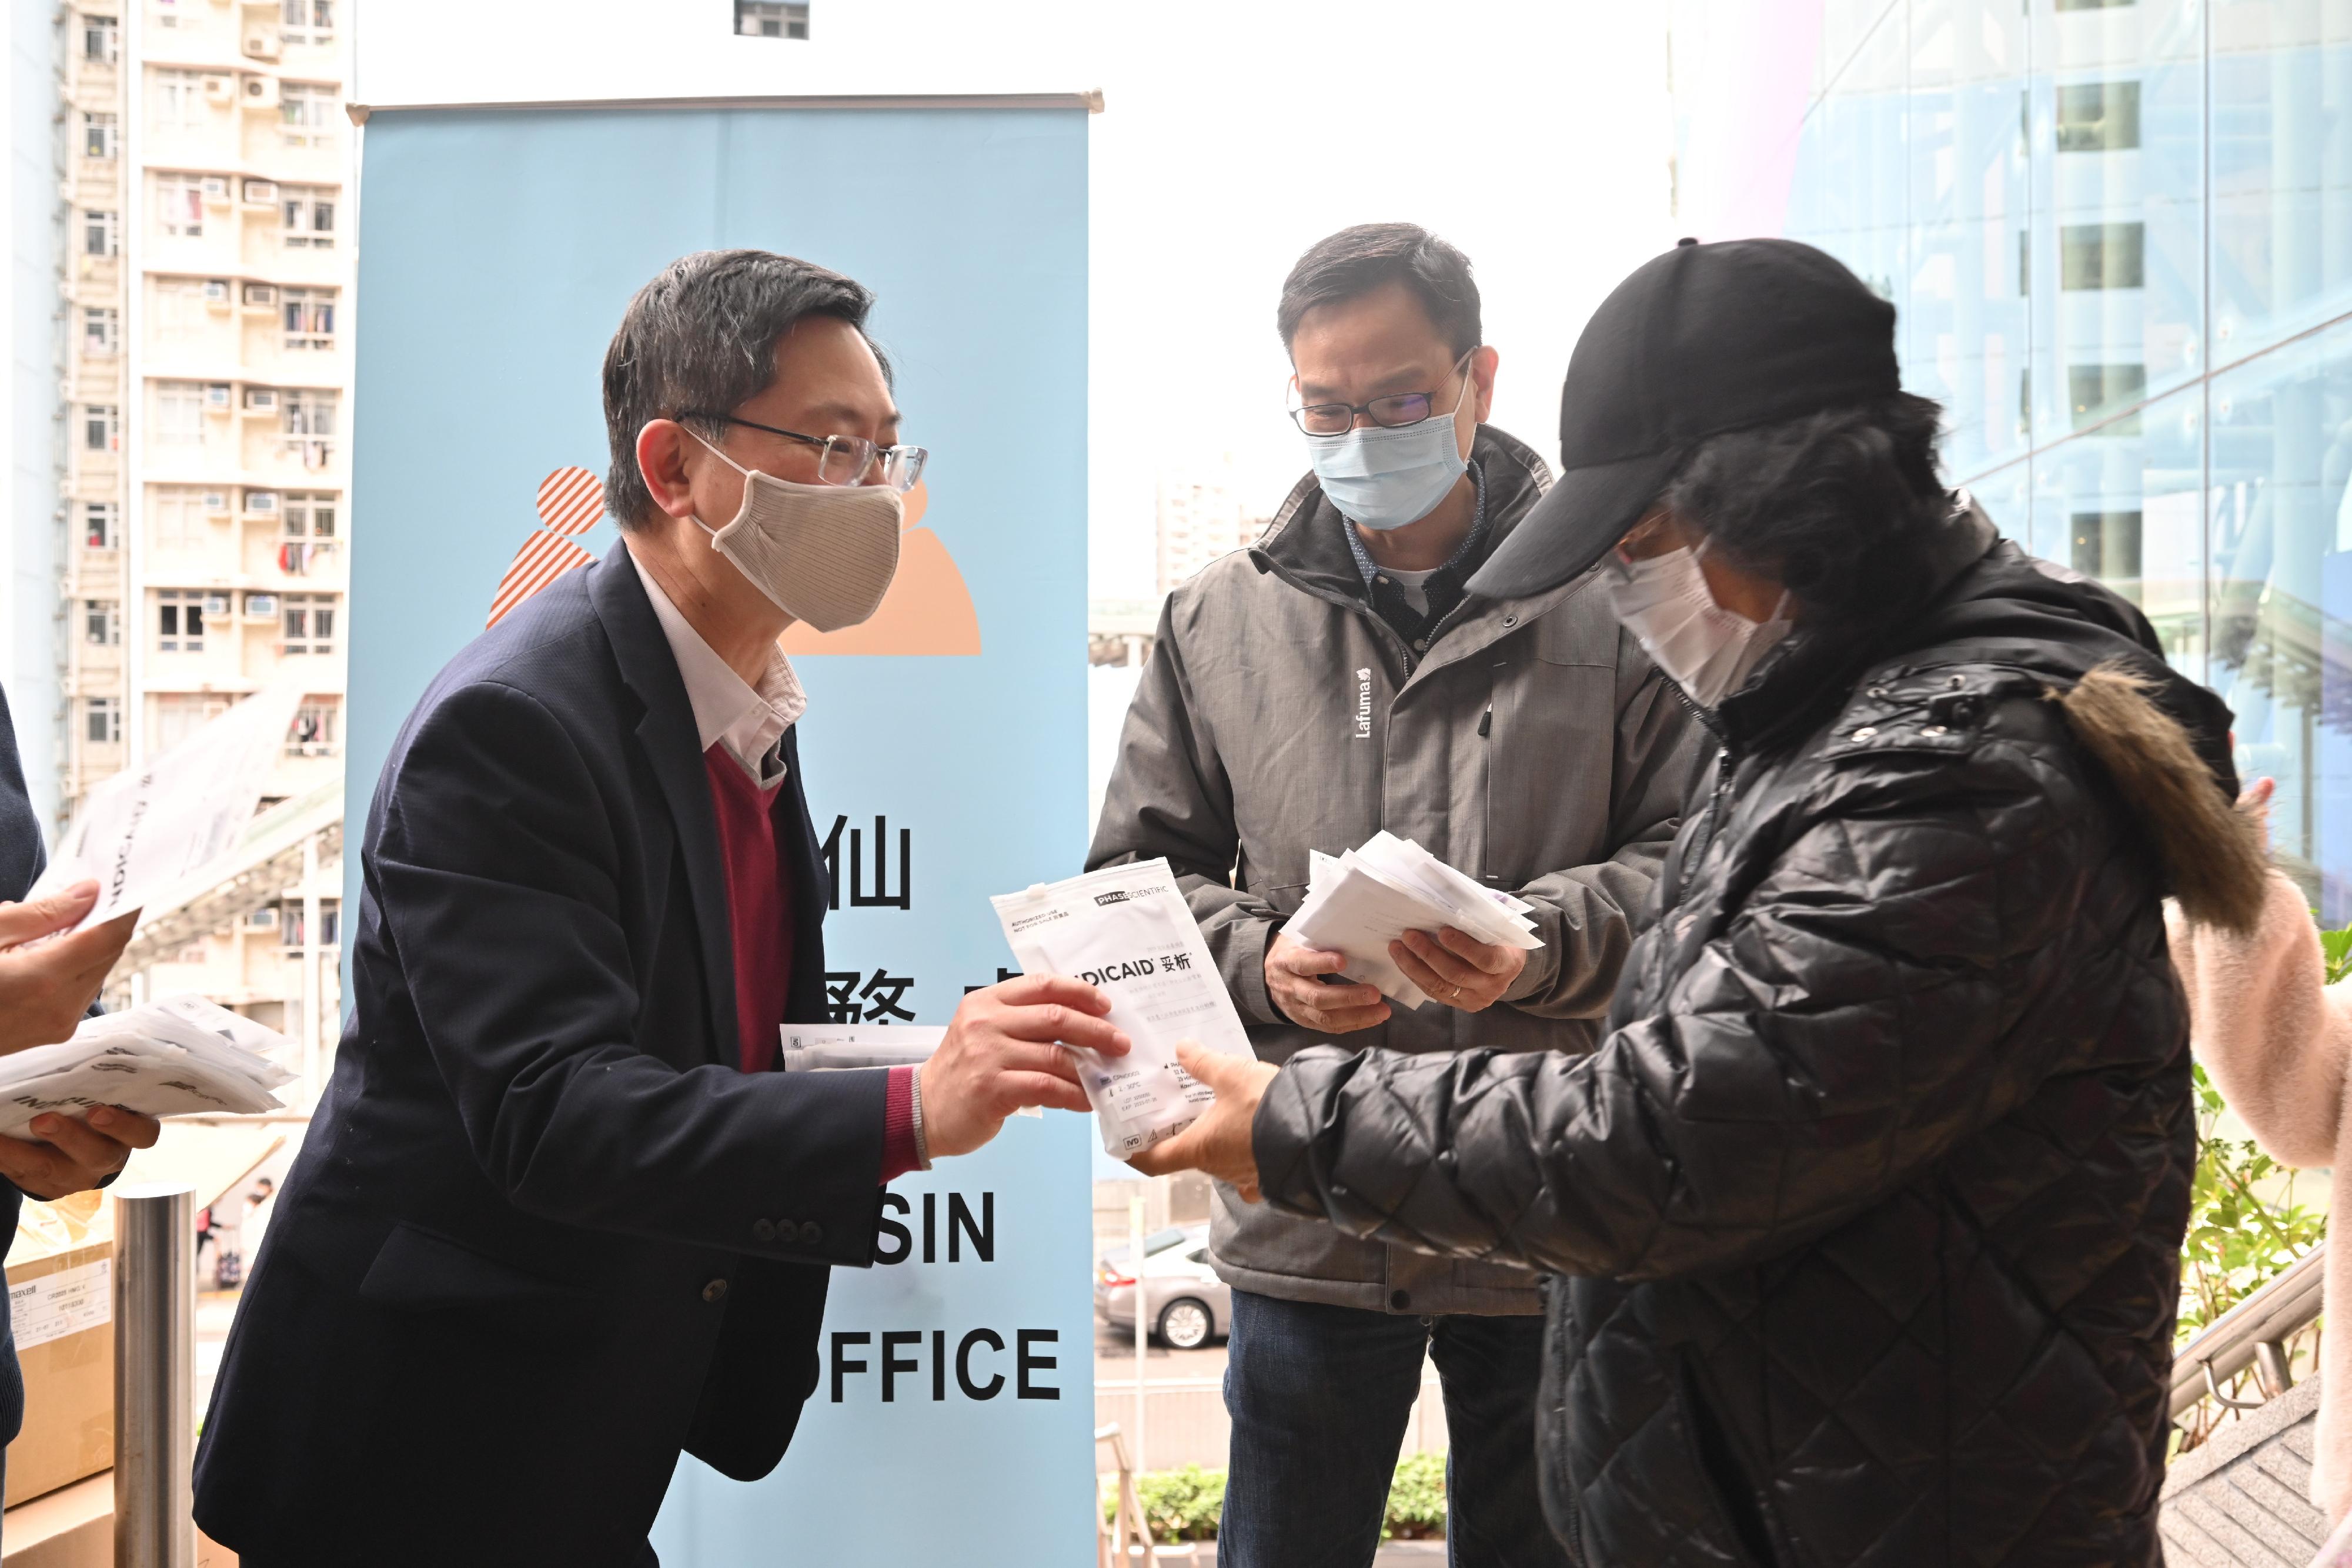 The Secretary for Innovation and Technology, Mr Alfred Sit (first left),distributes COVID-19 rapid test kit at Tsz Wan Shan Shopping Centre today (February 3) and calls on residents to undergo voluntary testing and help fight the virus together.